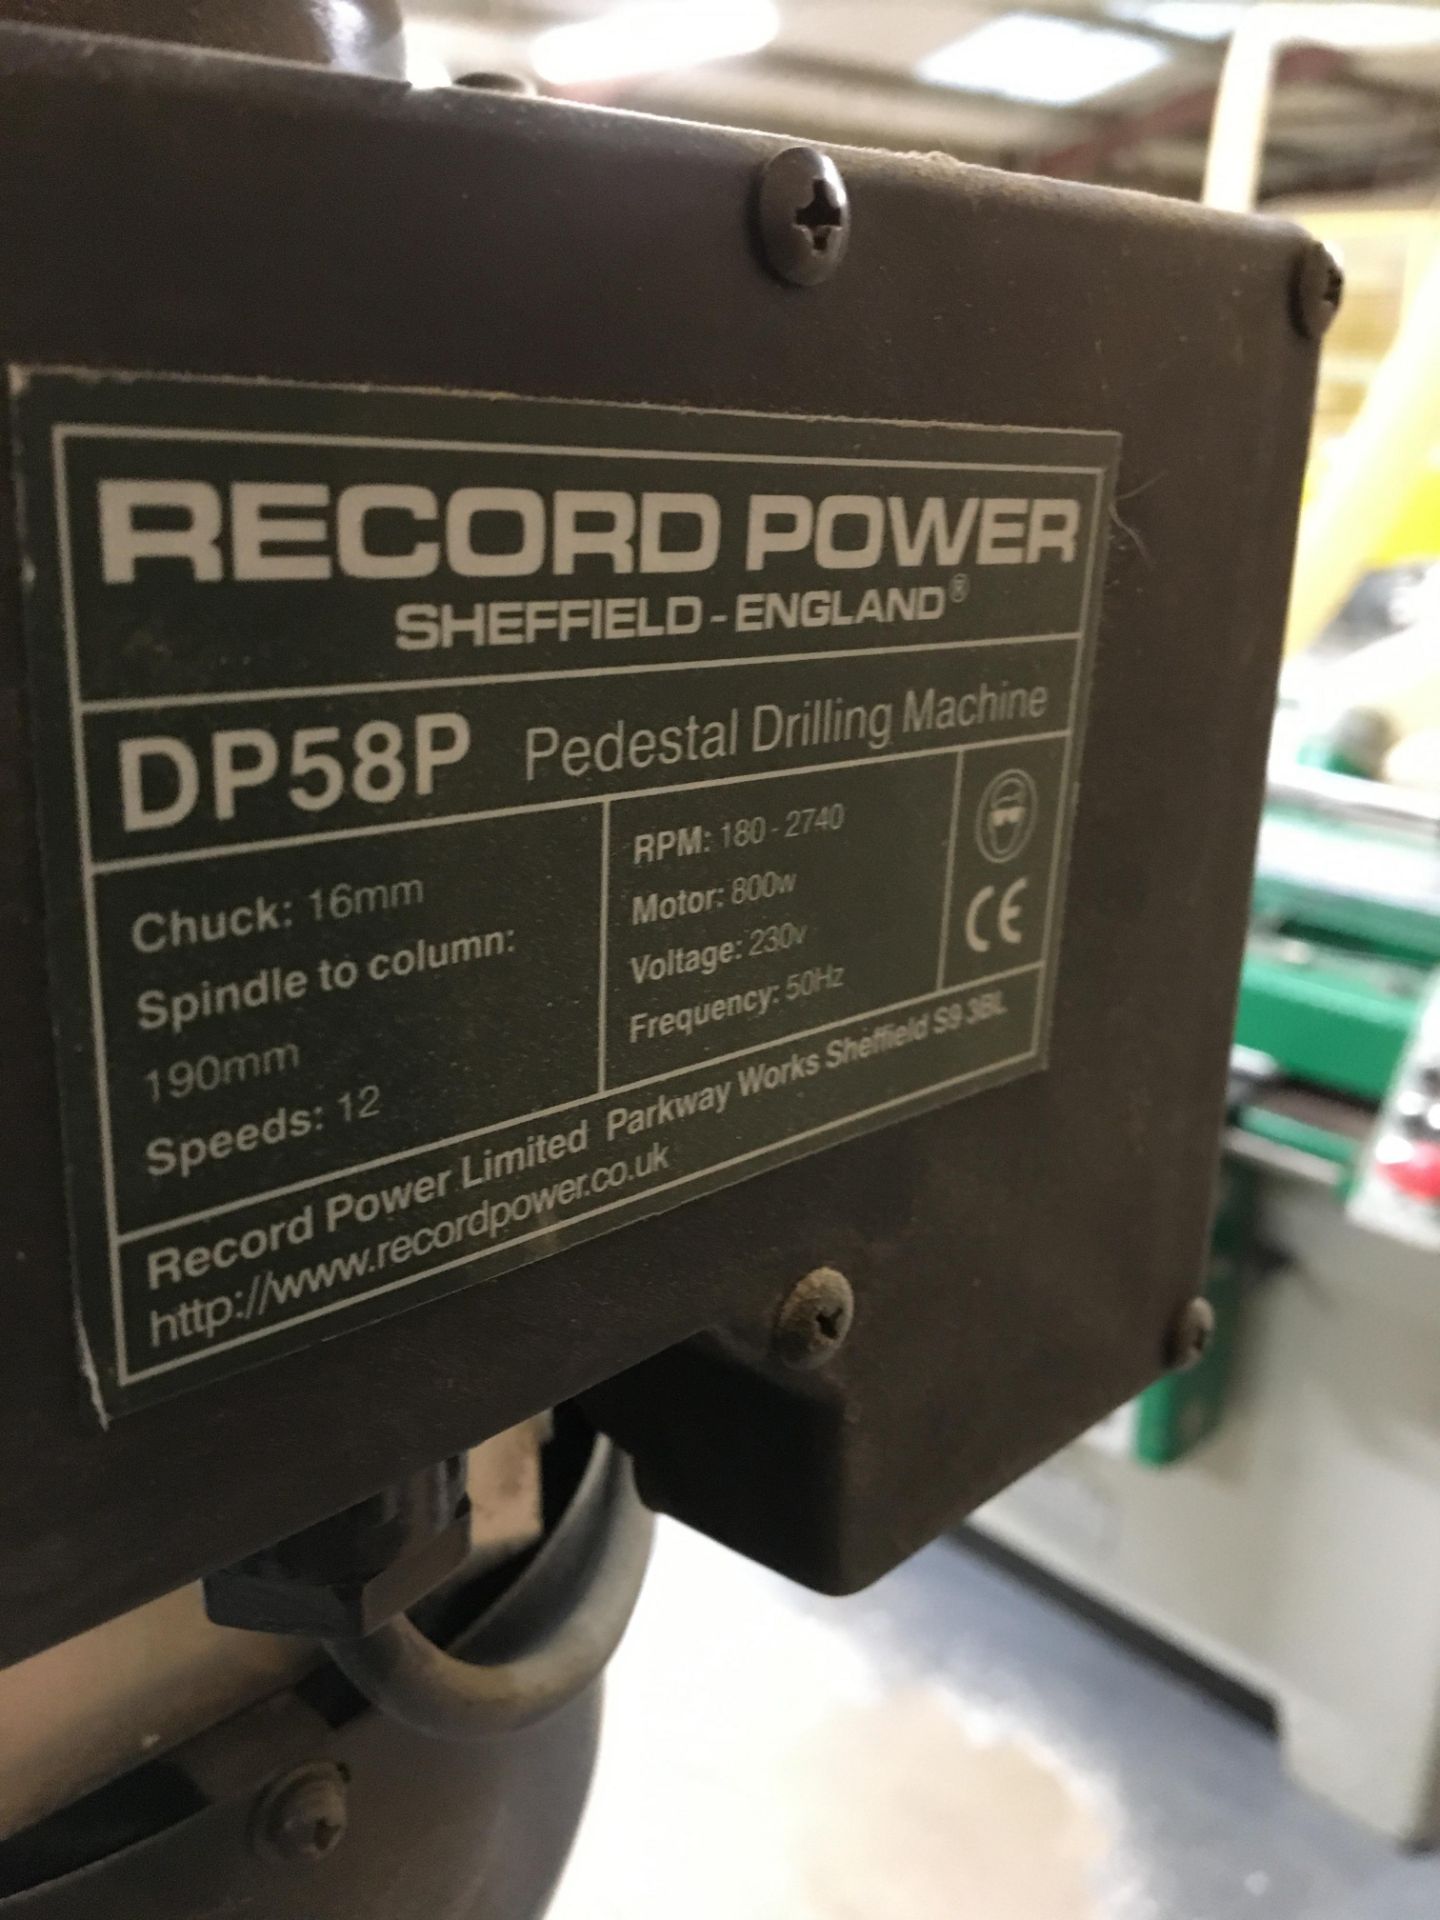 Record, Power DP58P pedestal drill. Chuck: 16mm; spindle to column: 190mm; speeds: 12 (Ref: 281) ( - Image 4 of 4